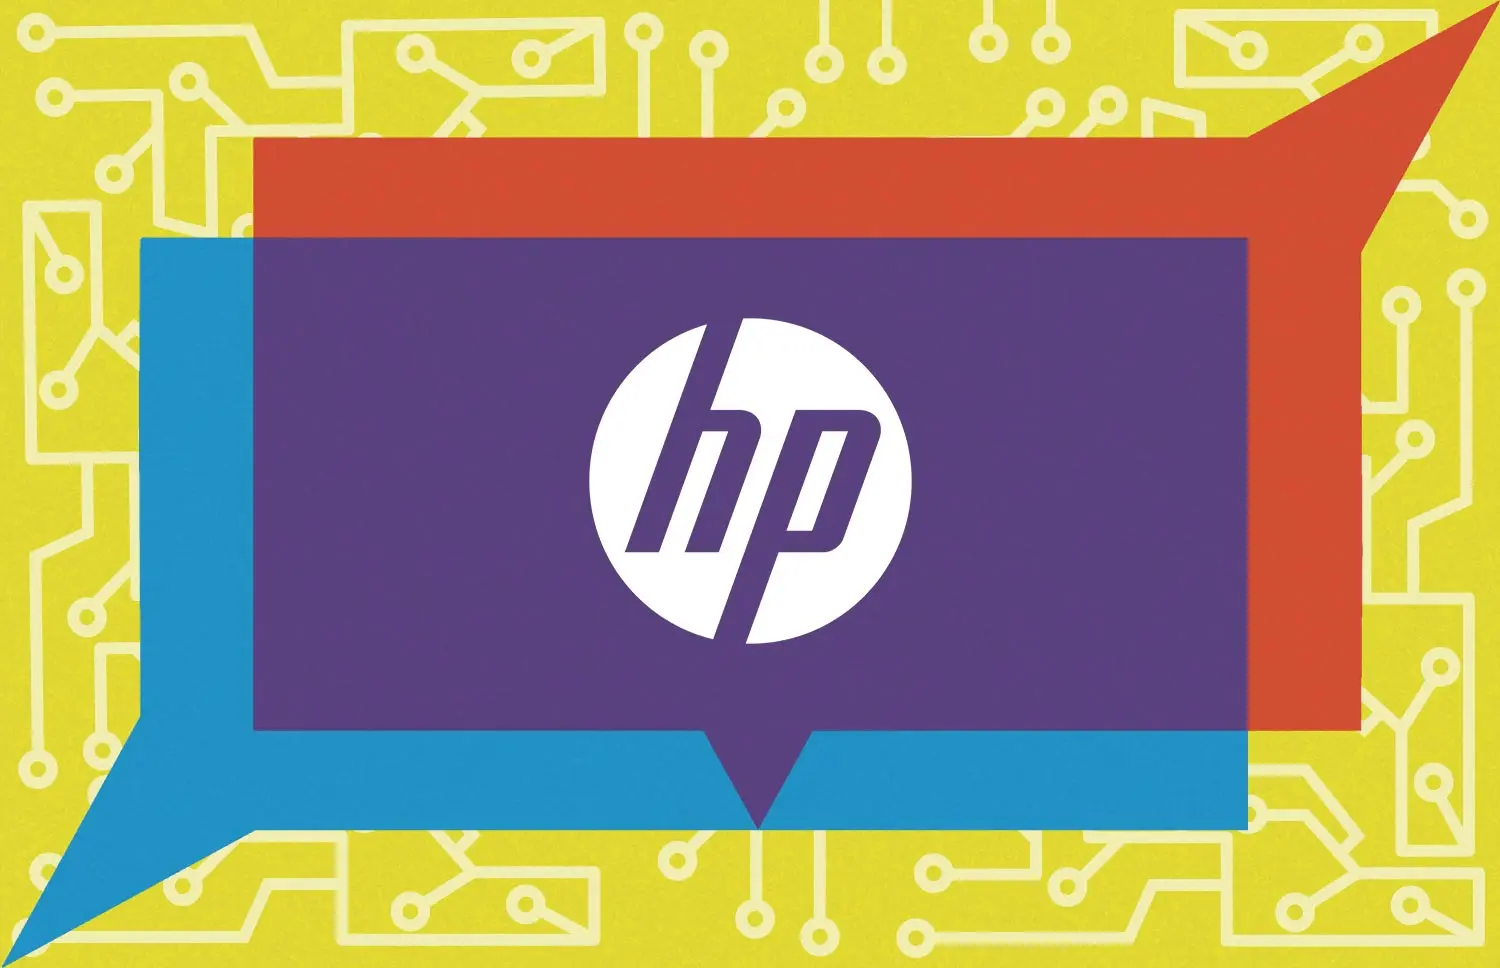 hewlett packard canada customer service - What is the phone number for HP Canada Co 877 231 4351